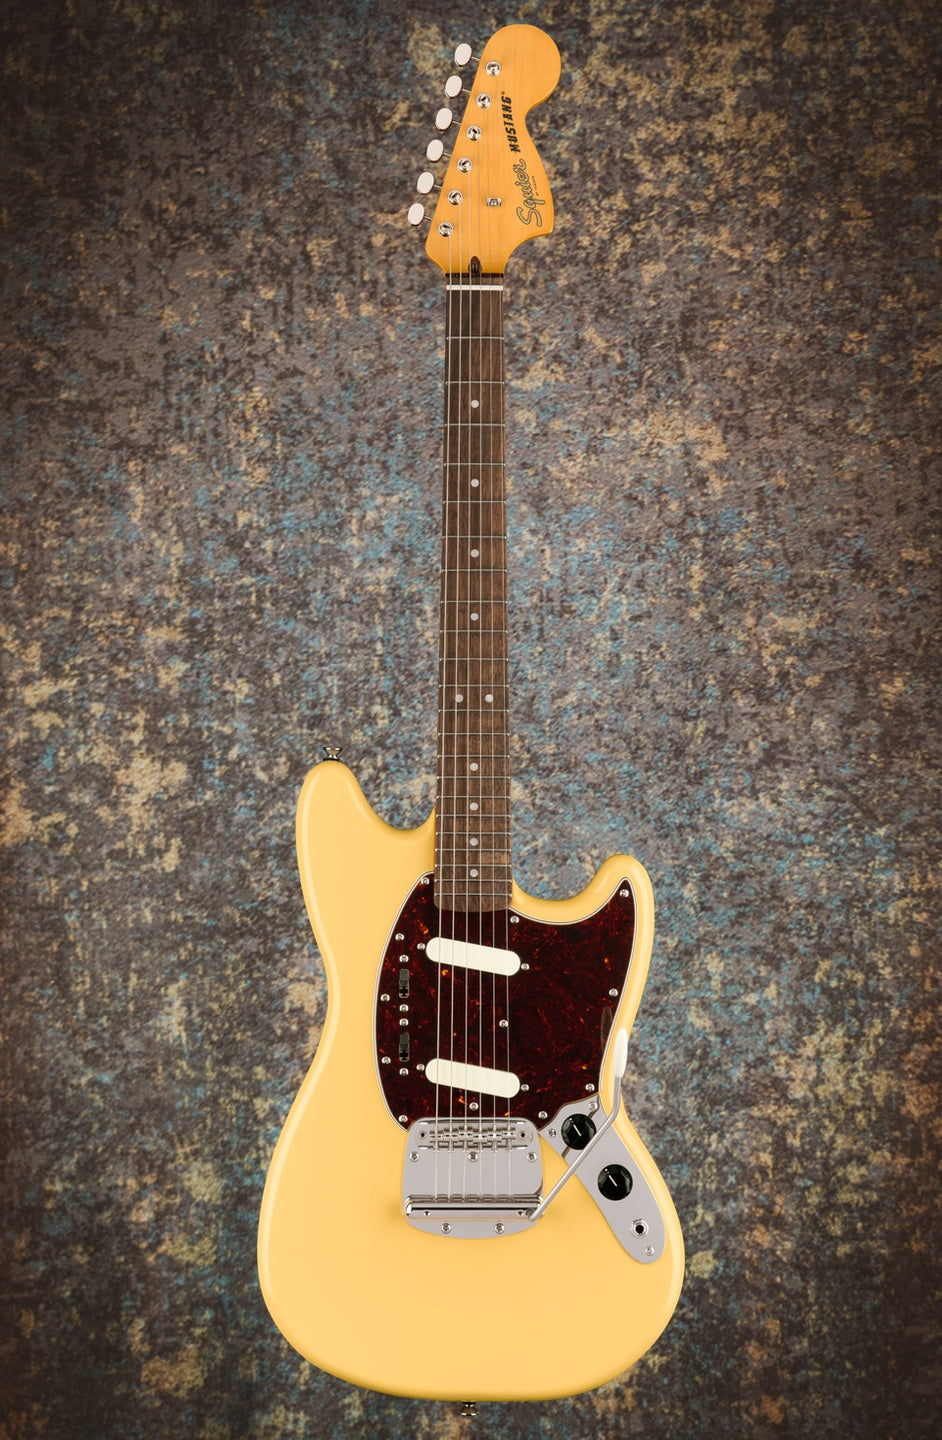 Squier Classic Vibe 60's Mustang, Vintage White